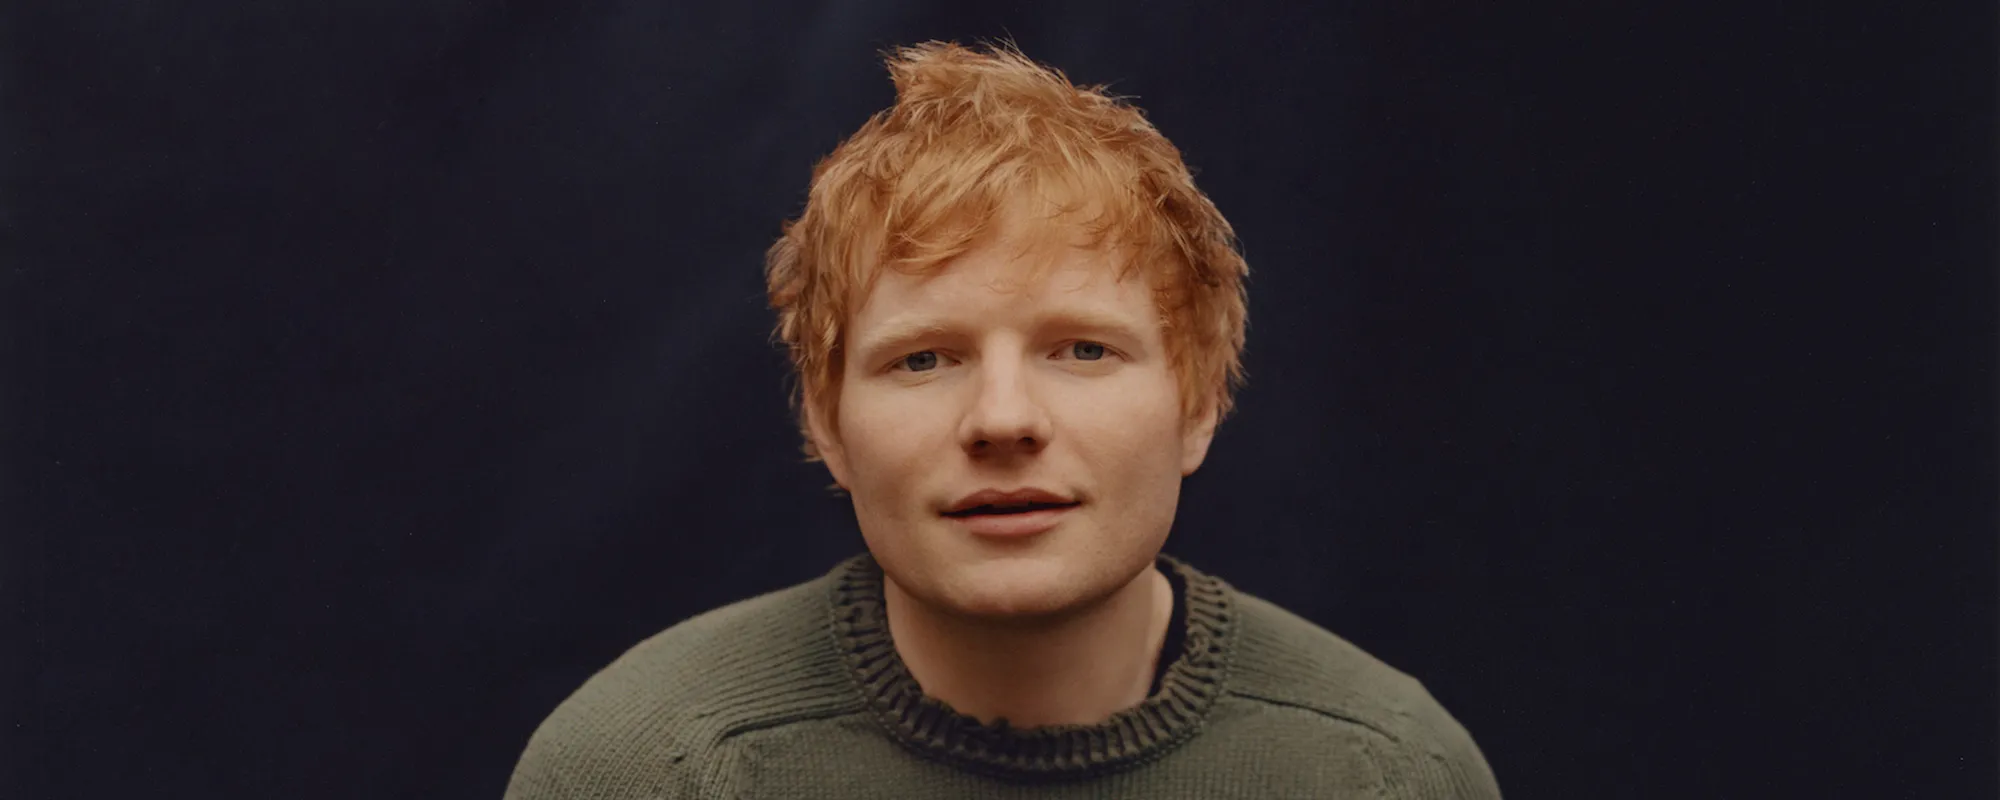 15 Songs You Didn’t Know Ed Sheeran Wrote for Other Artists